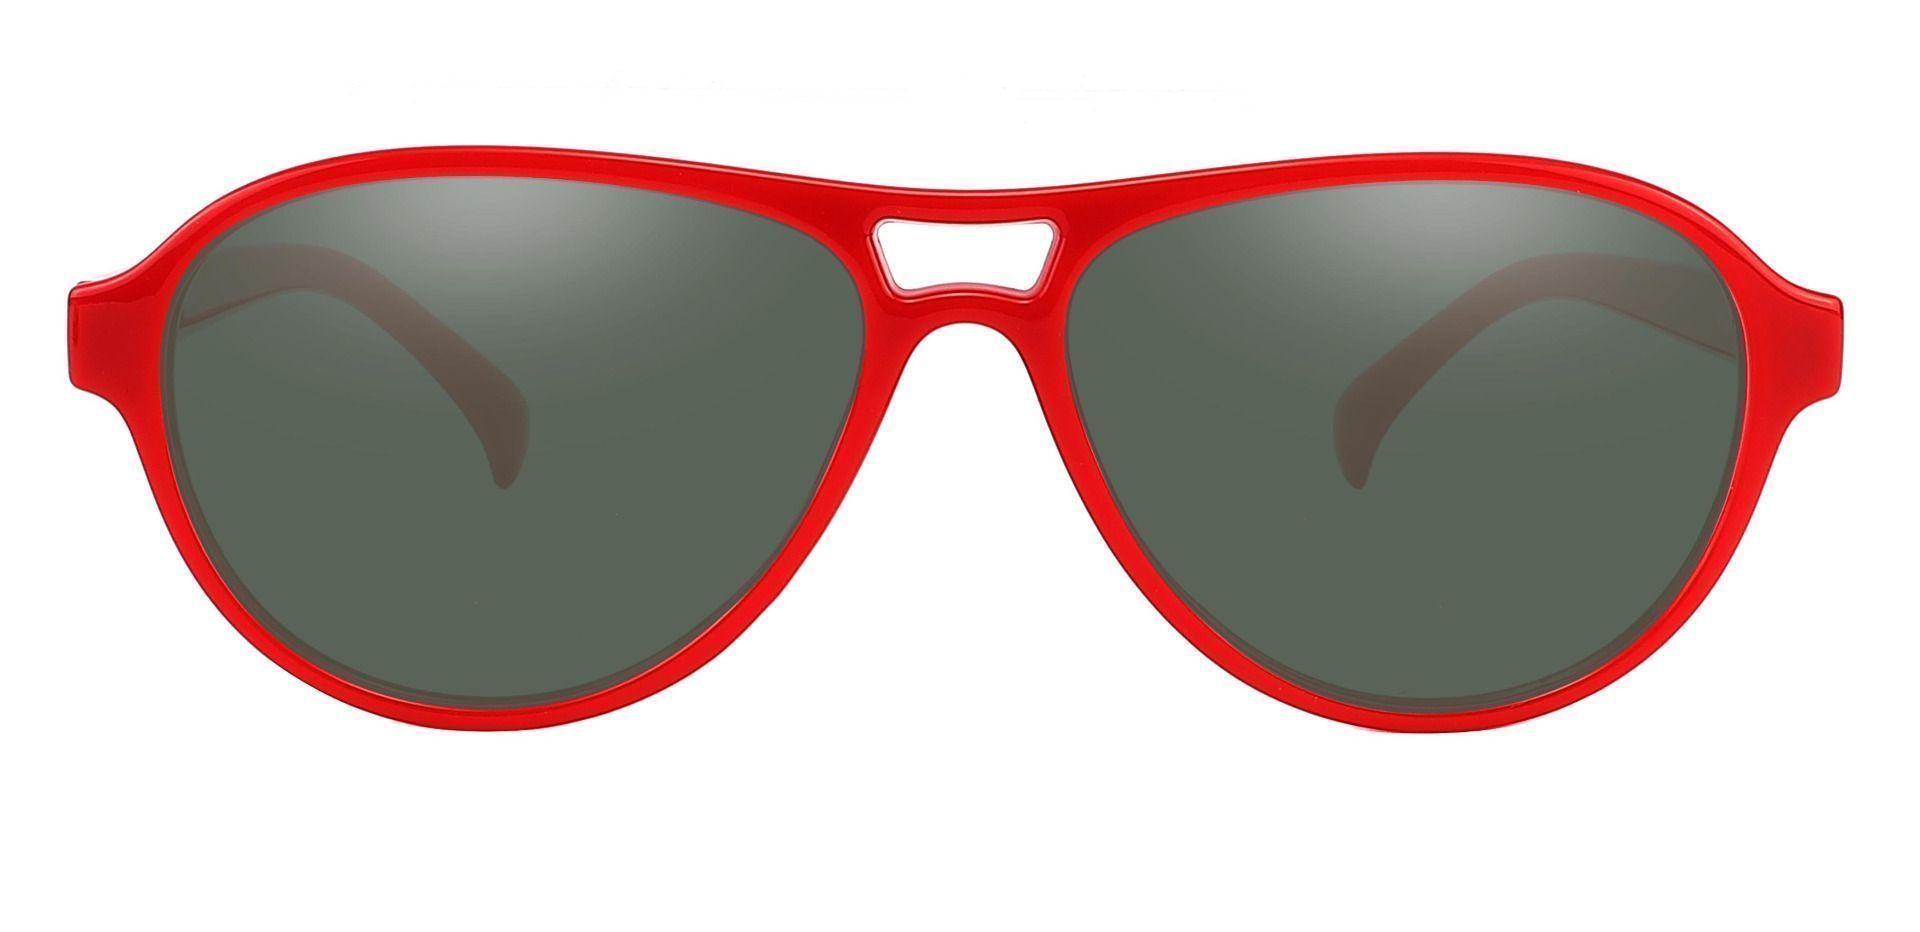 Sosa Aviator Non-Rx Sunglasses - Red Frame With Green Lenses